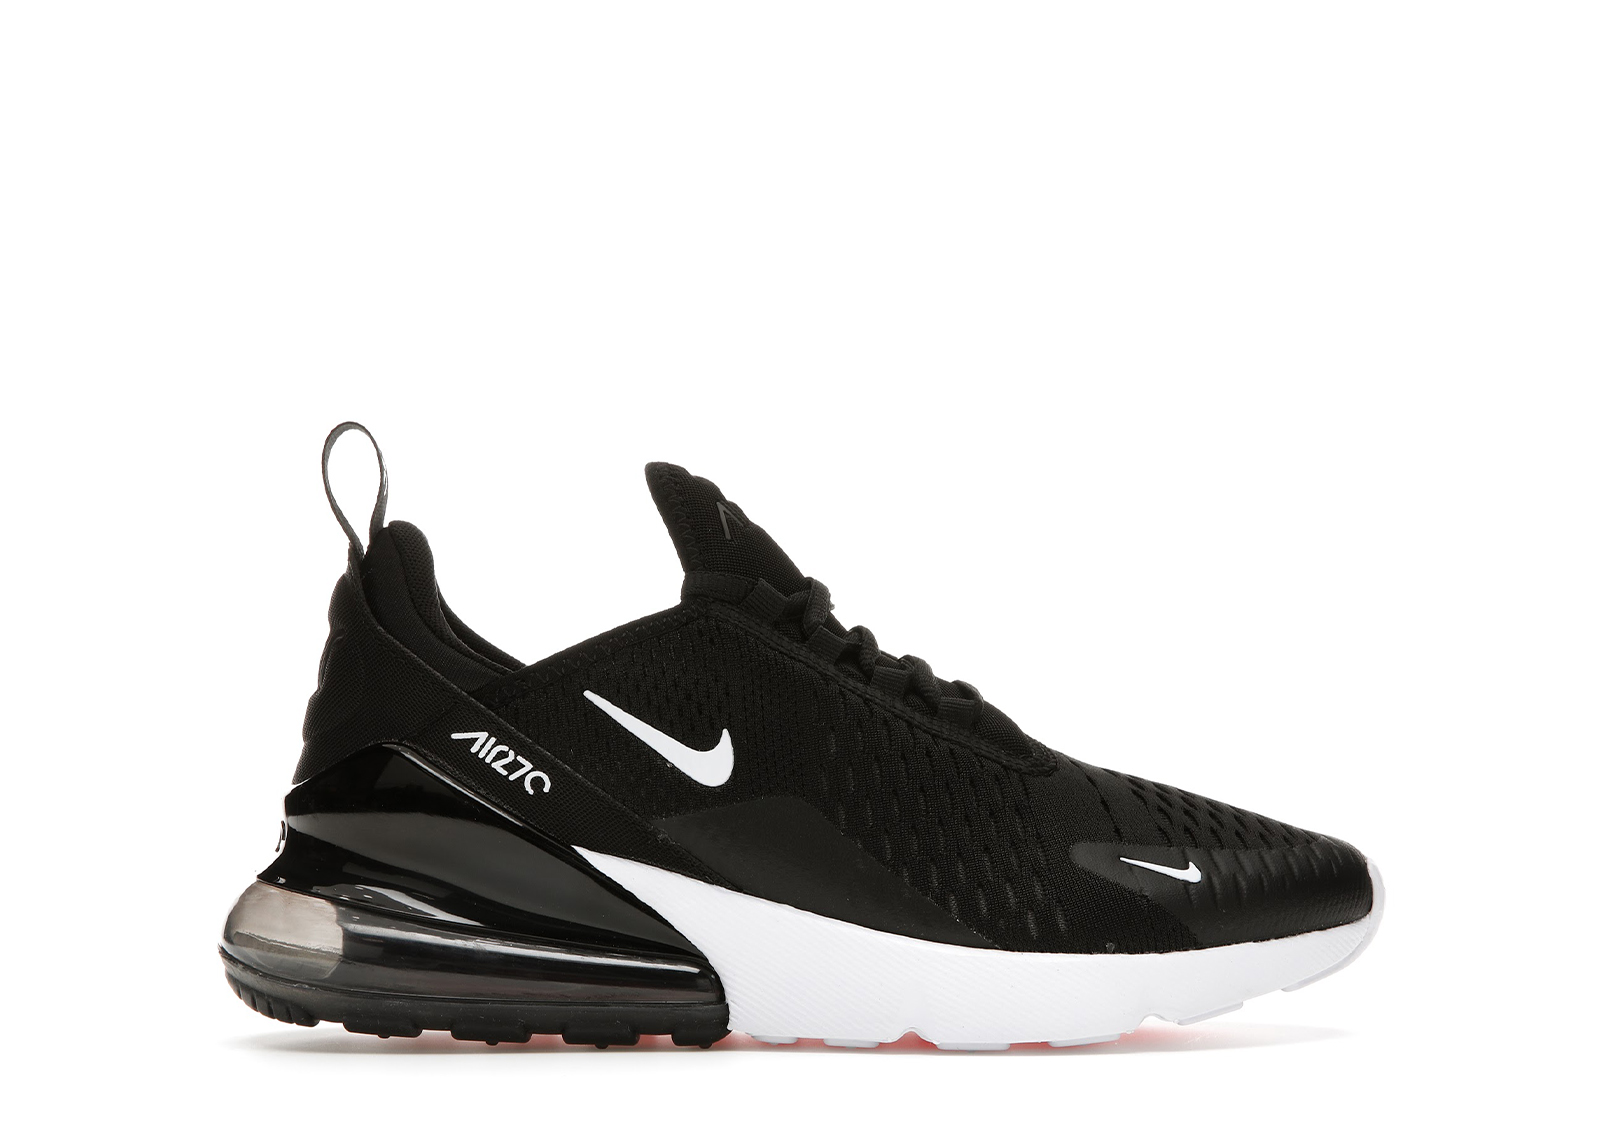 Buy Nike Air Max 270 Shoes & Deadstock Sneakers مكيف ٢ طن